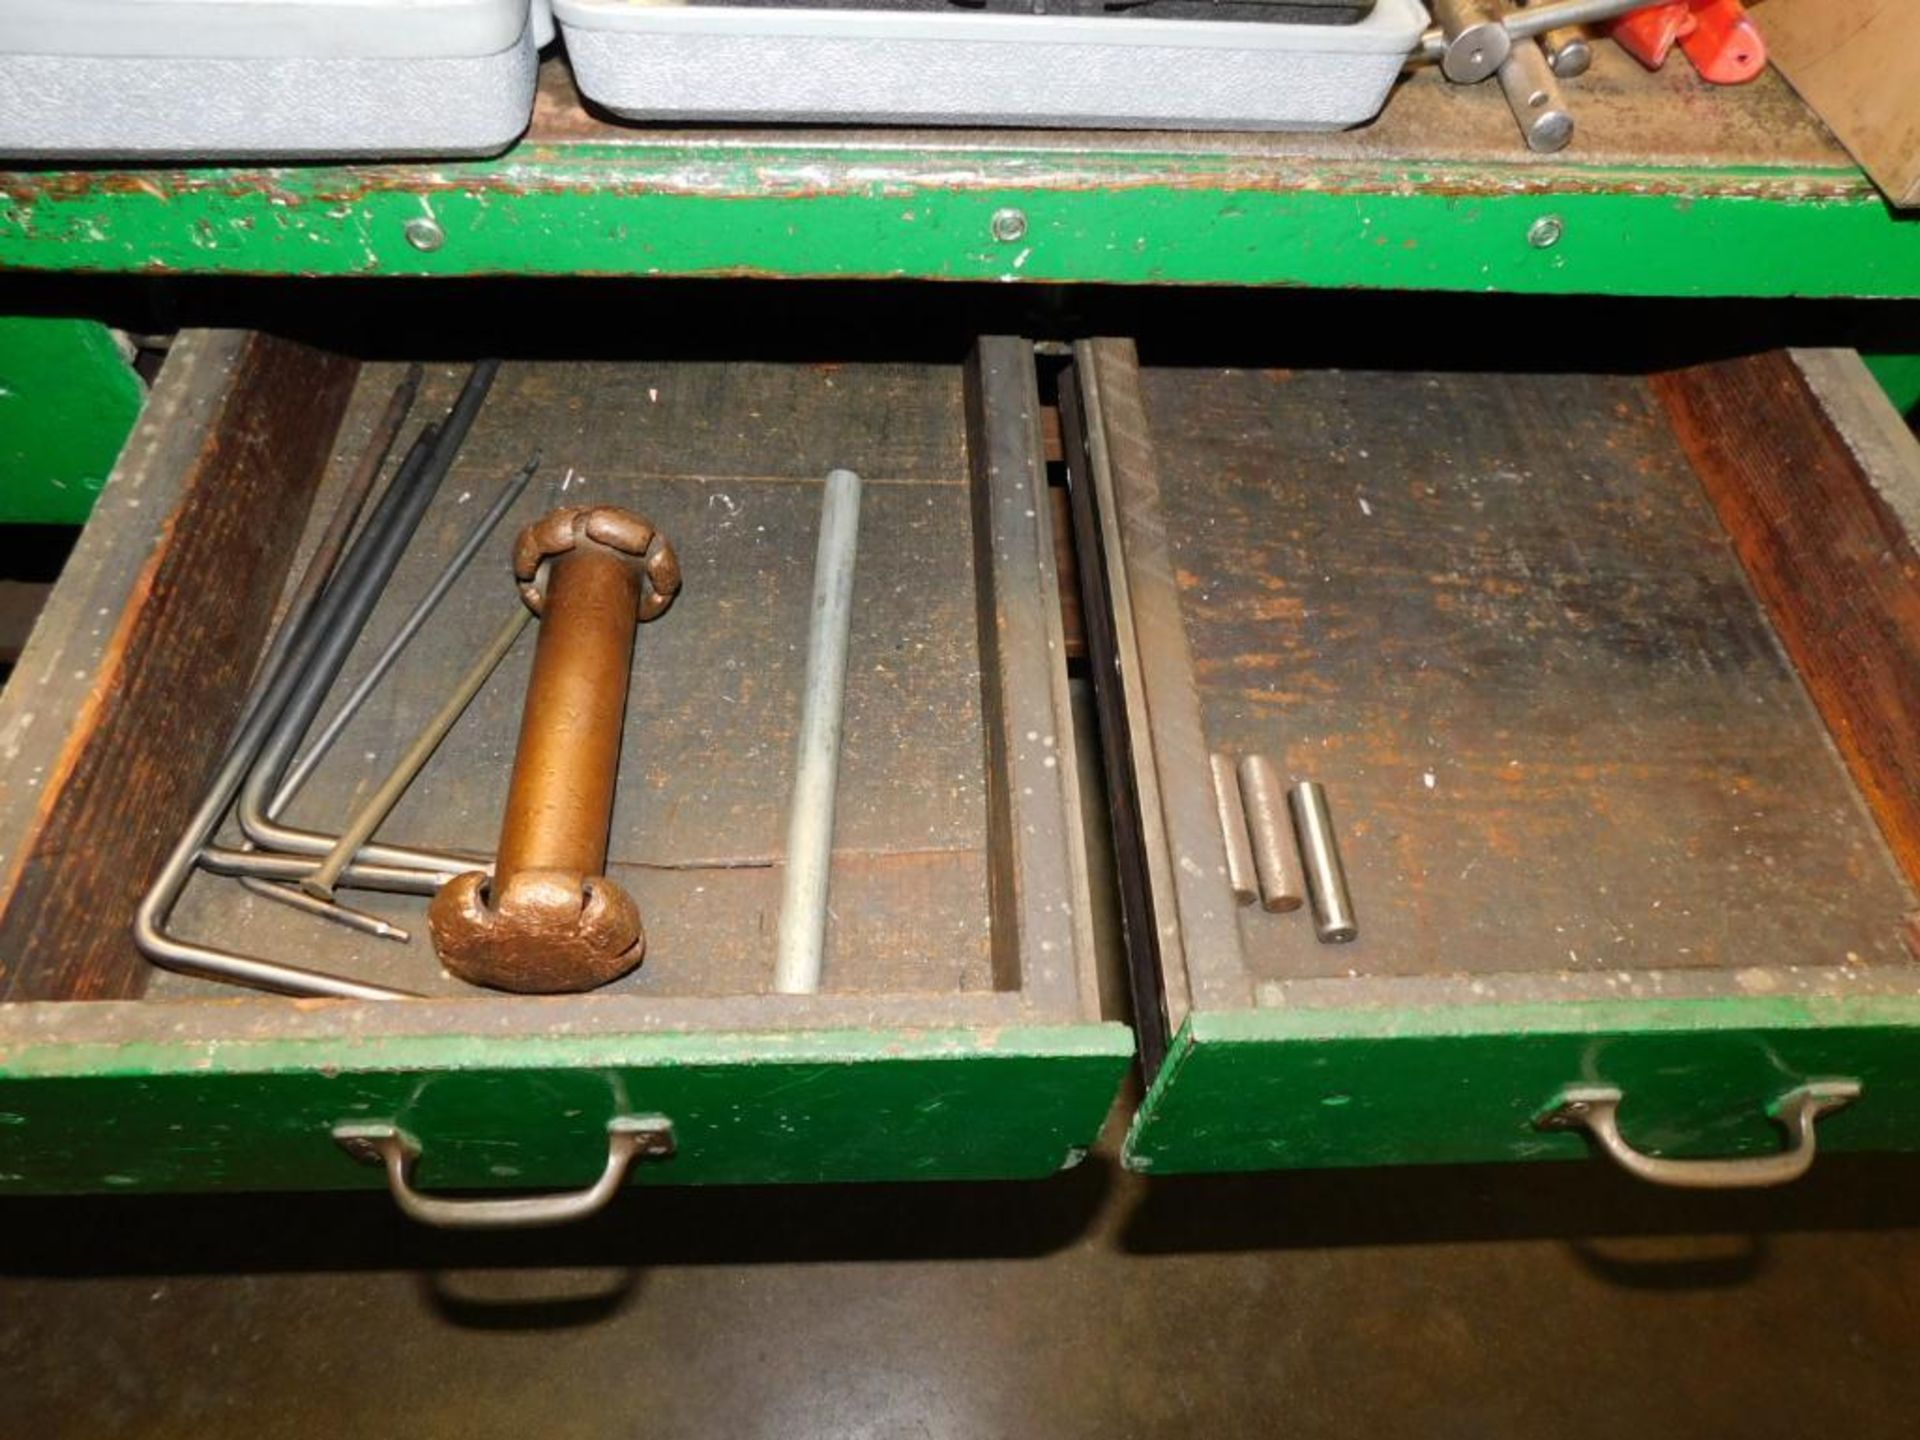 Columbian 4-1/2" Vise on 72" x 34" Work Bench (NO CONTENTS, DELAYED REMOVAL, CONTACT SITE MANAGER) - Image 7 of 7